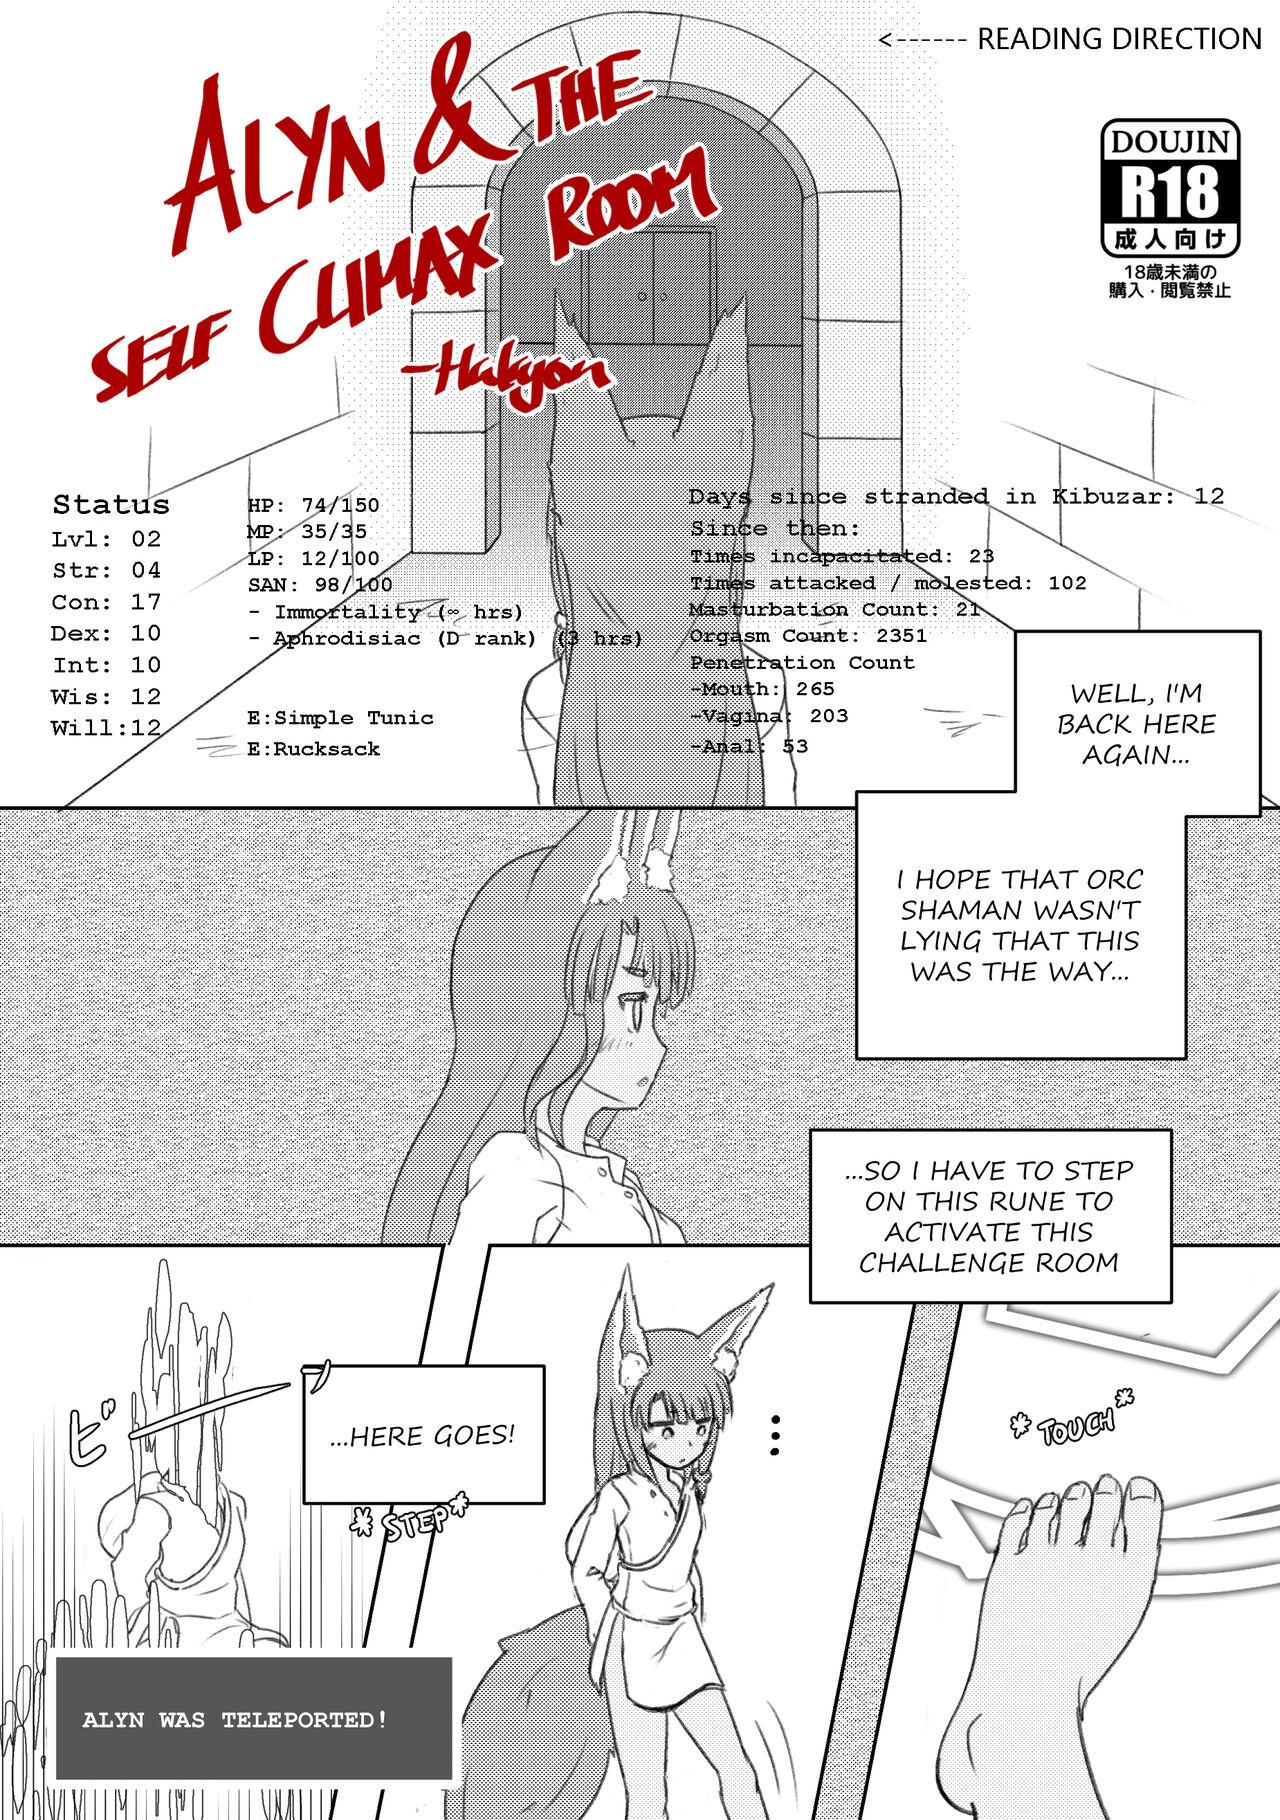 Maledom Alyn & The Self Climax Room - Ero trap dungeon Emo Gay - Page 1